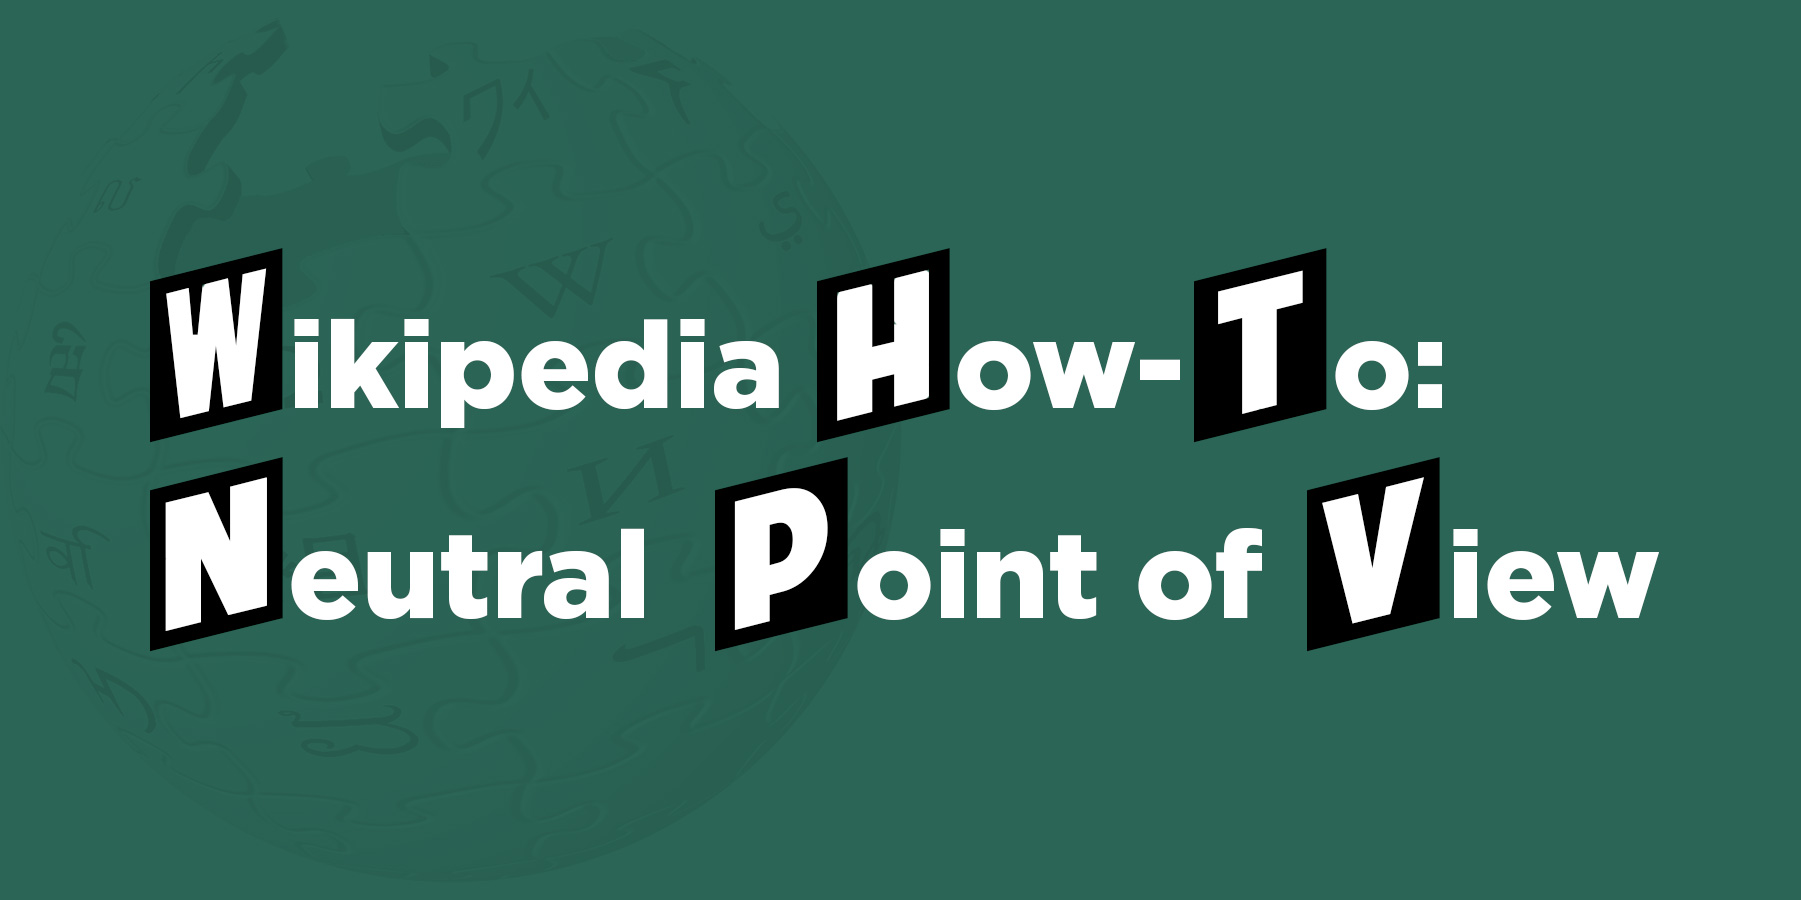 Wikipedia How-To: Neutral Point of View